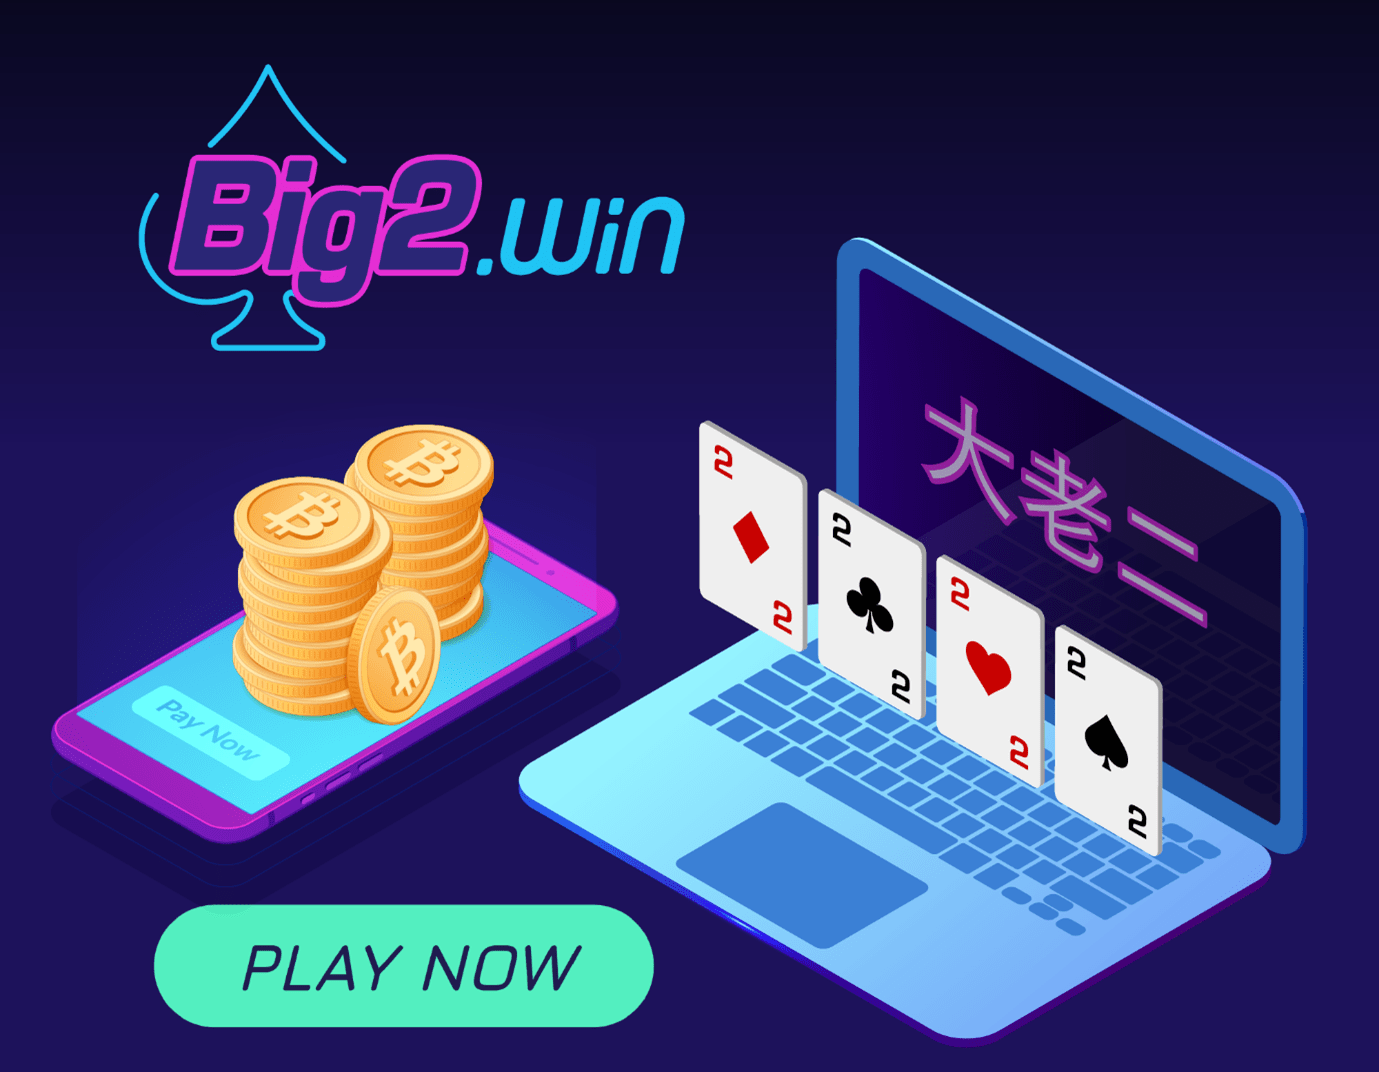 BIG2.WIN: Play One of the Most Familiar Games in a Crypto Setting